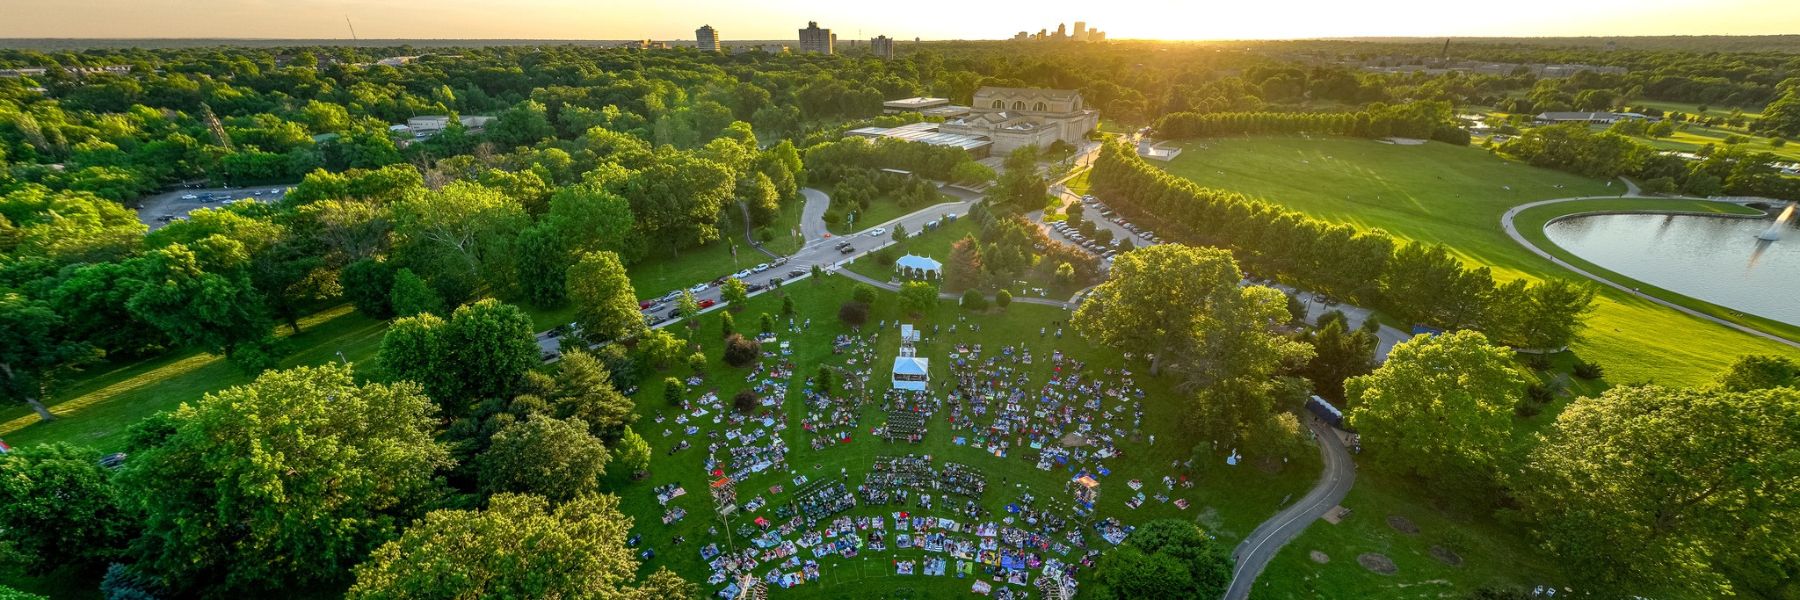 In St. Louis, Shakespeare in the Park is free and open to the public.